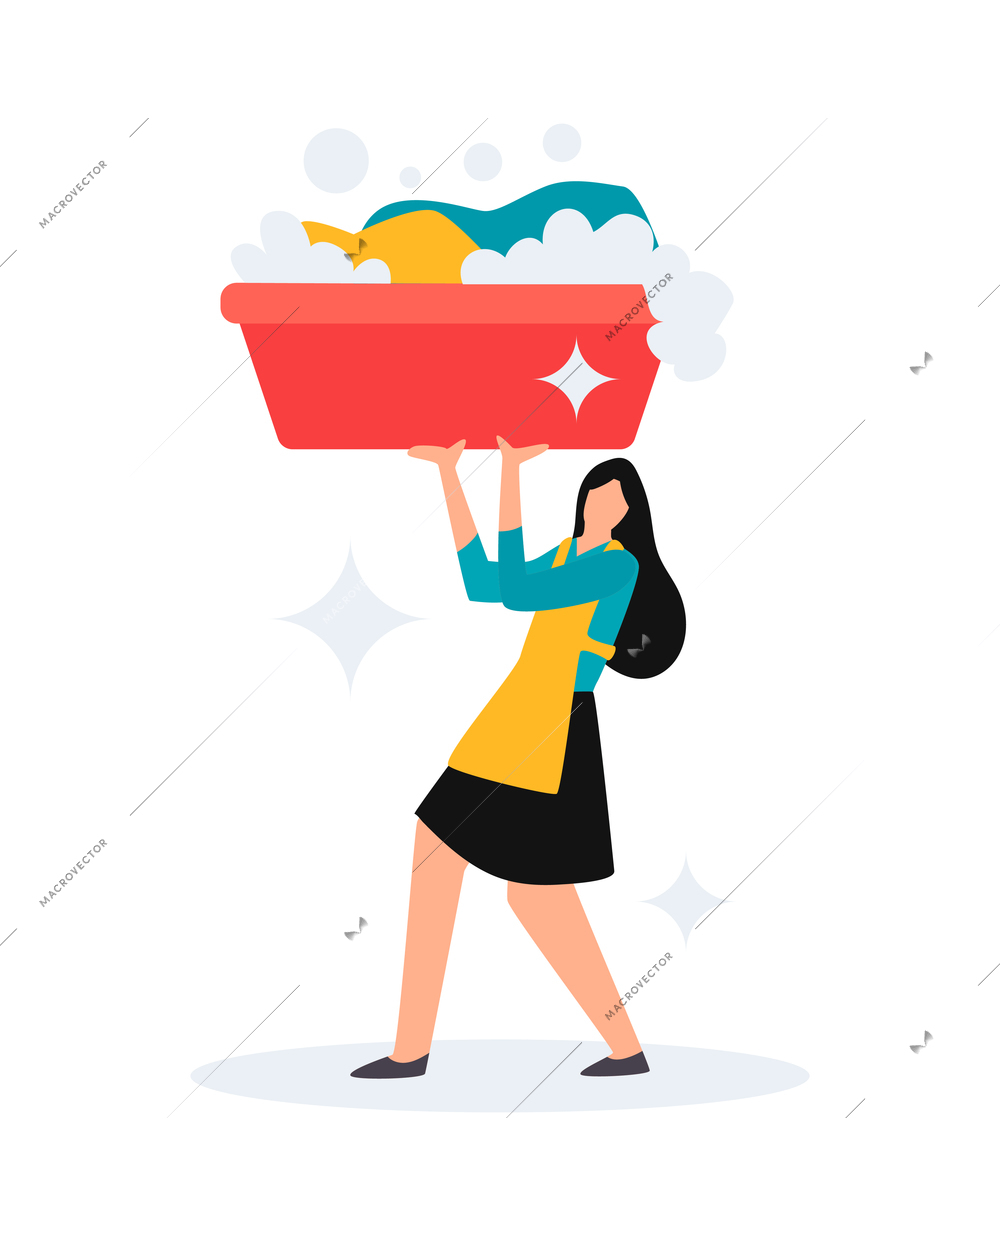 Flat icon with cleaning service worker in uniform doing laundry carrying basin with clothing vector illustration